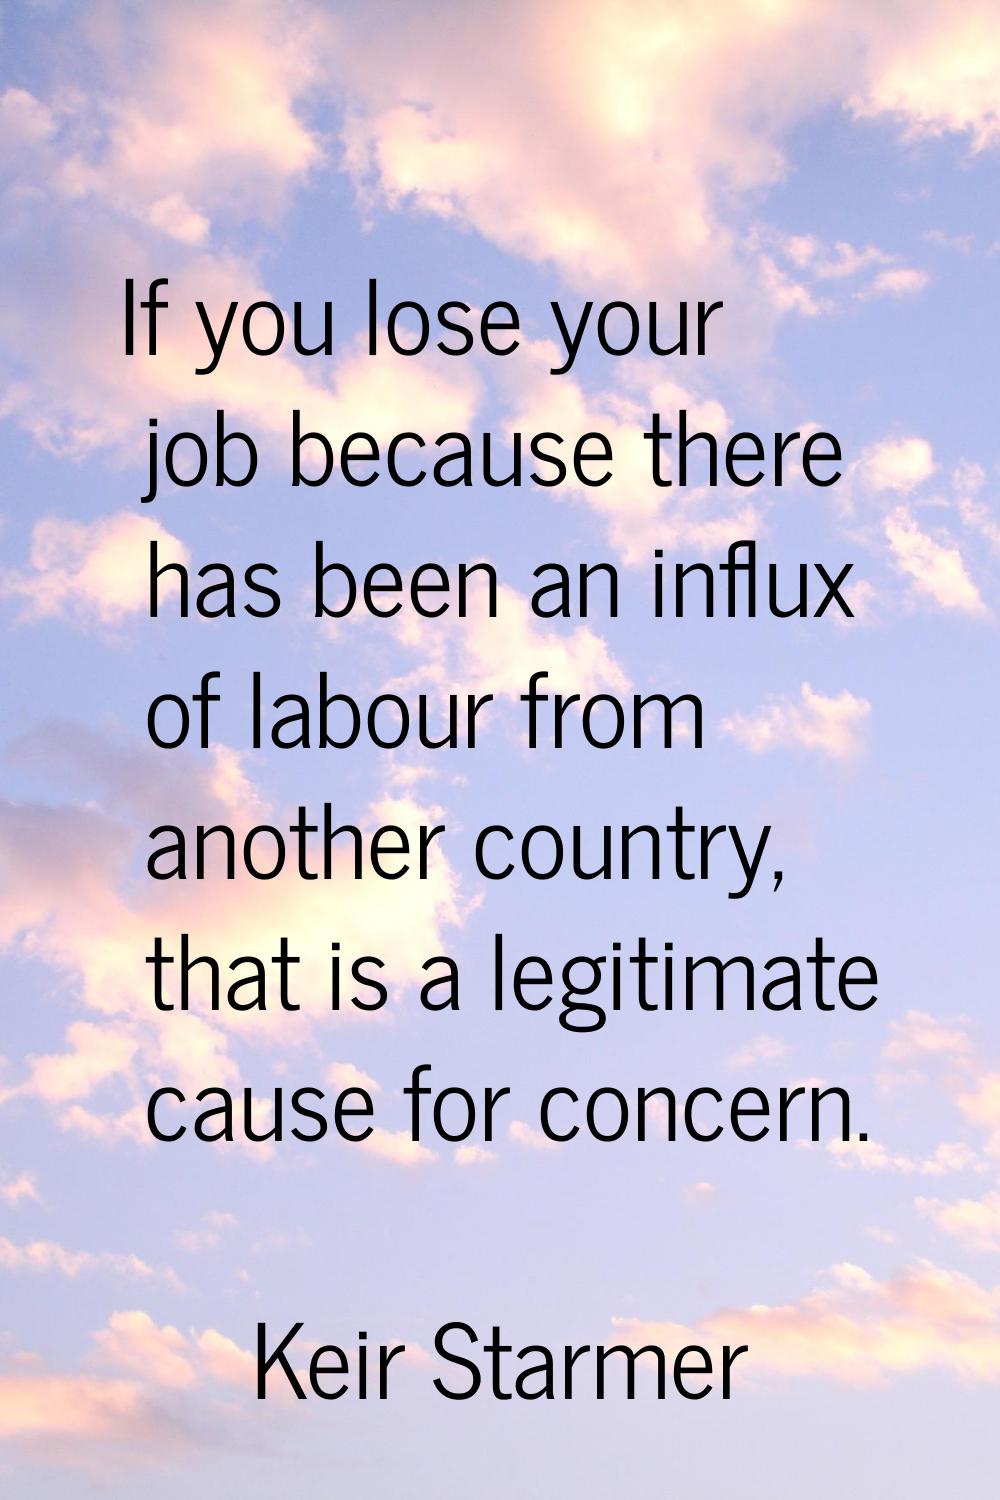 If you lose your job because there has been an influx of labour from another country, that is a leg